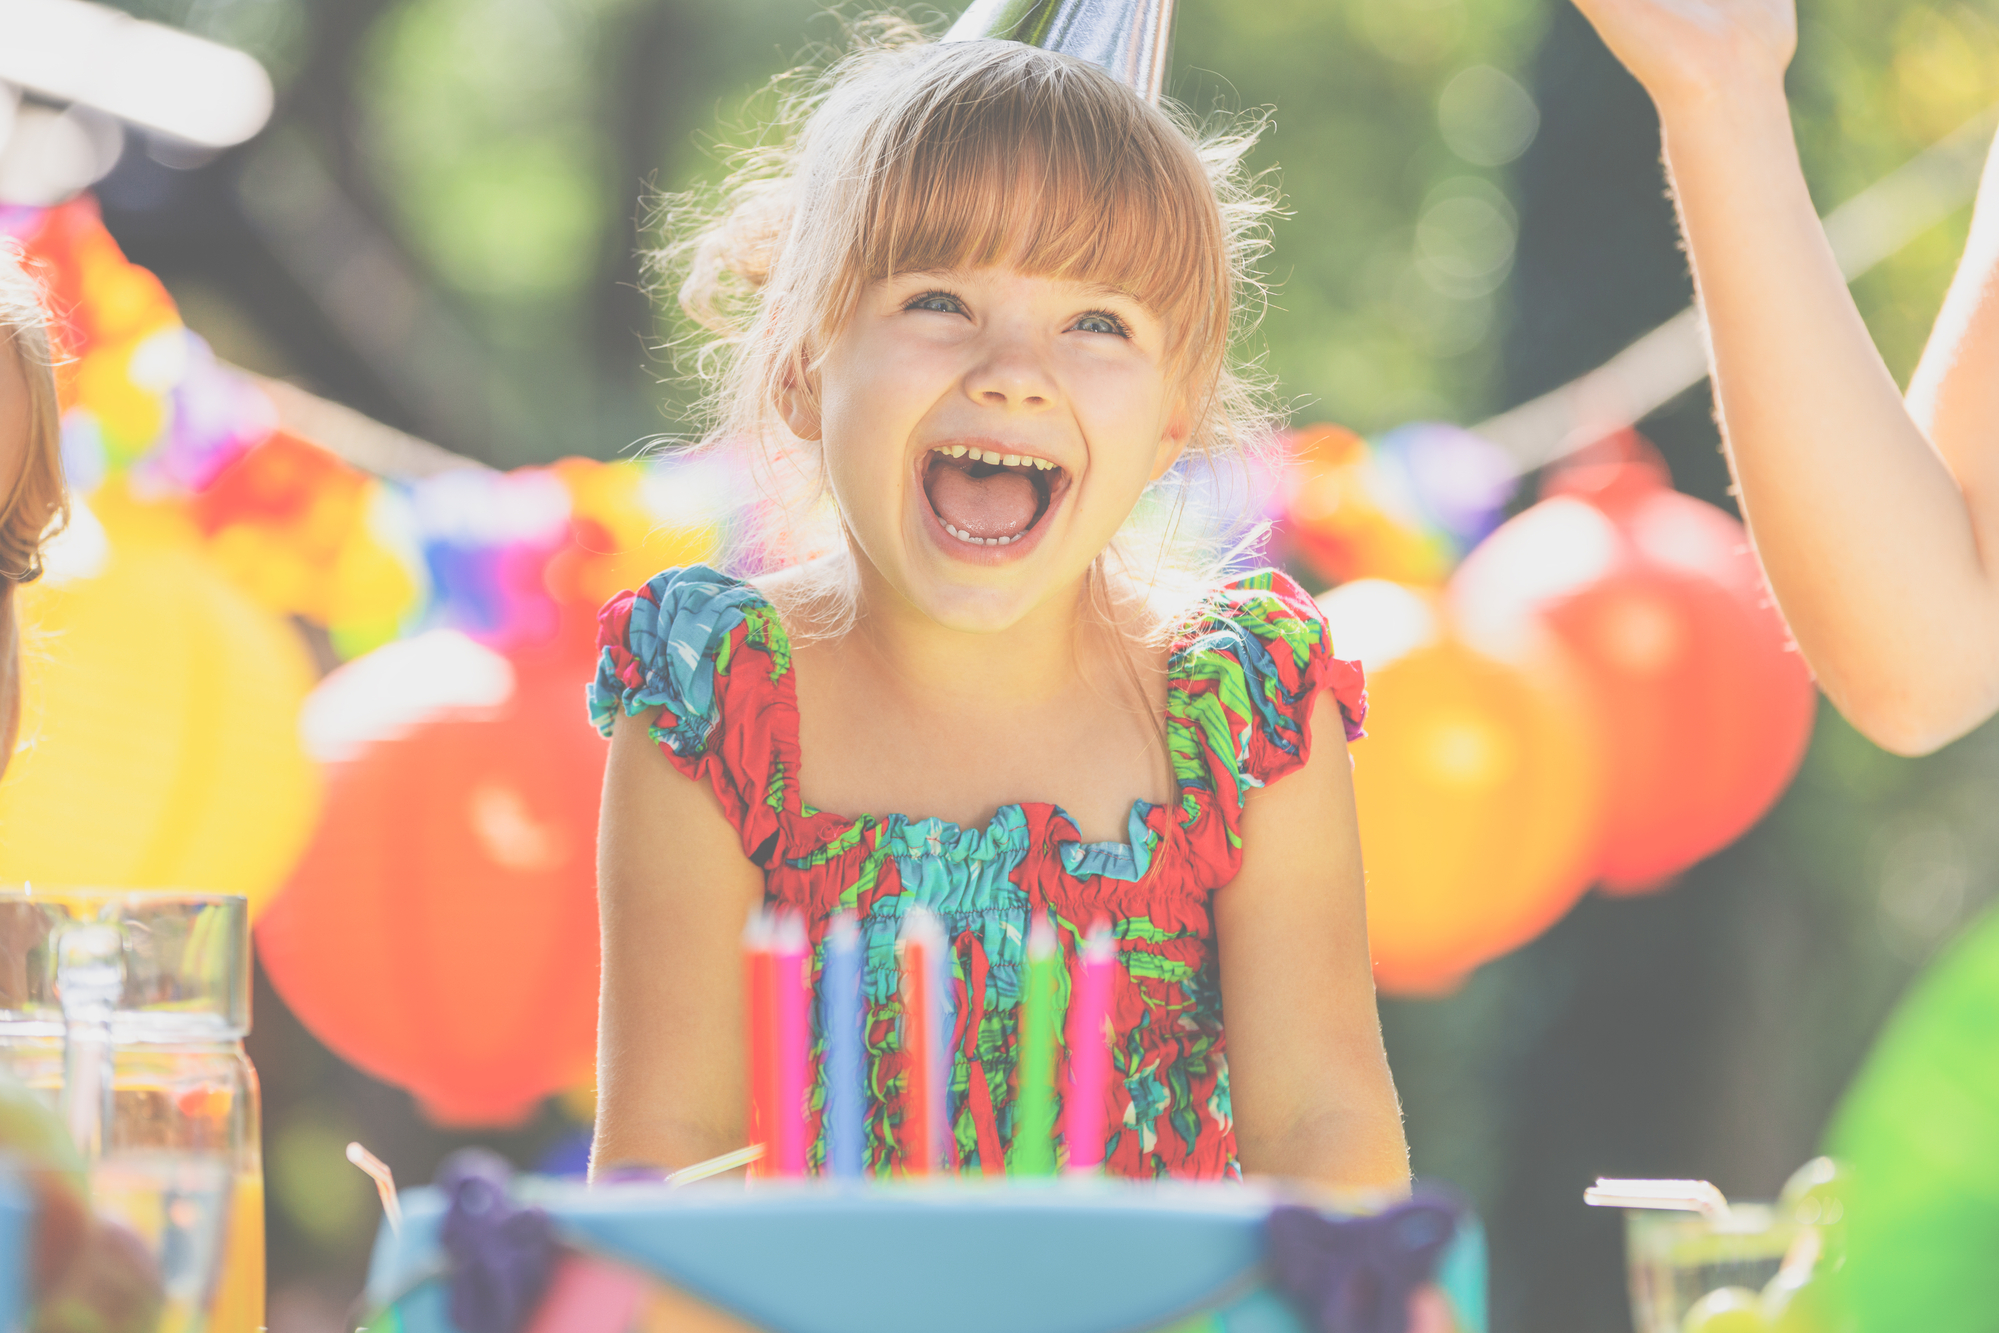 Smiling girl in colorful dress blowing out the candles on a birthday cake during party